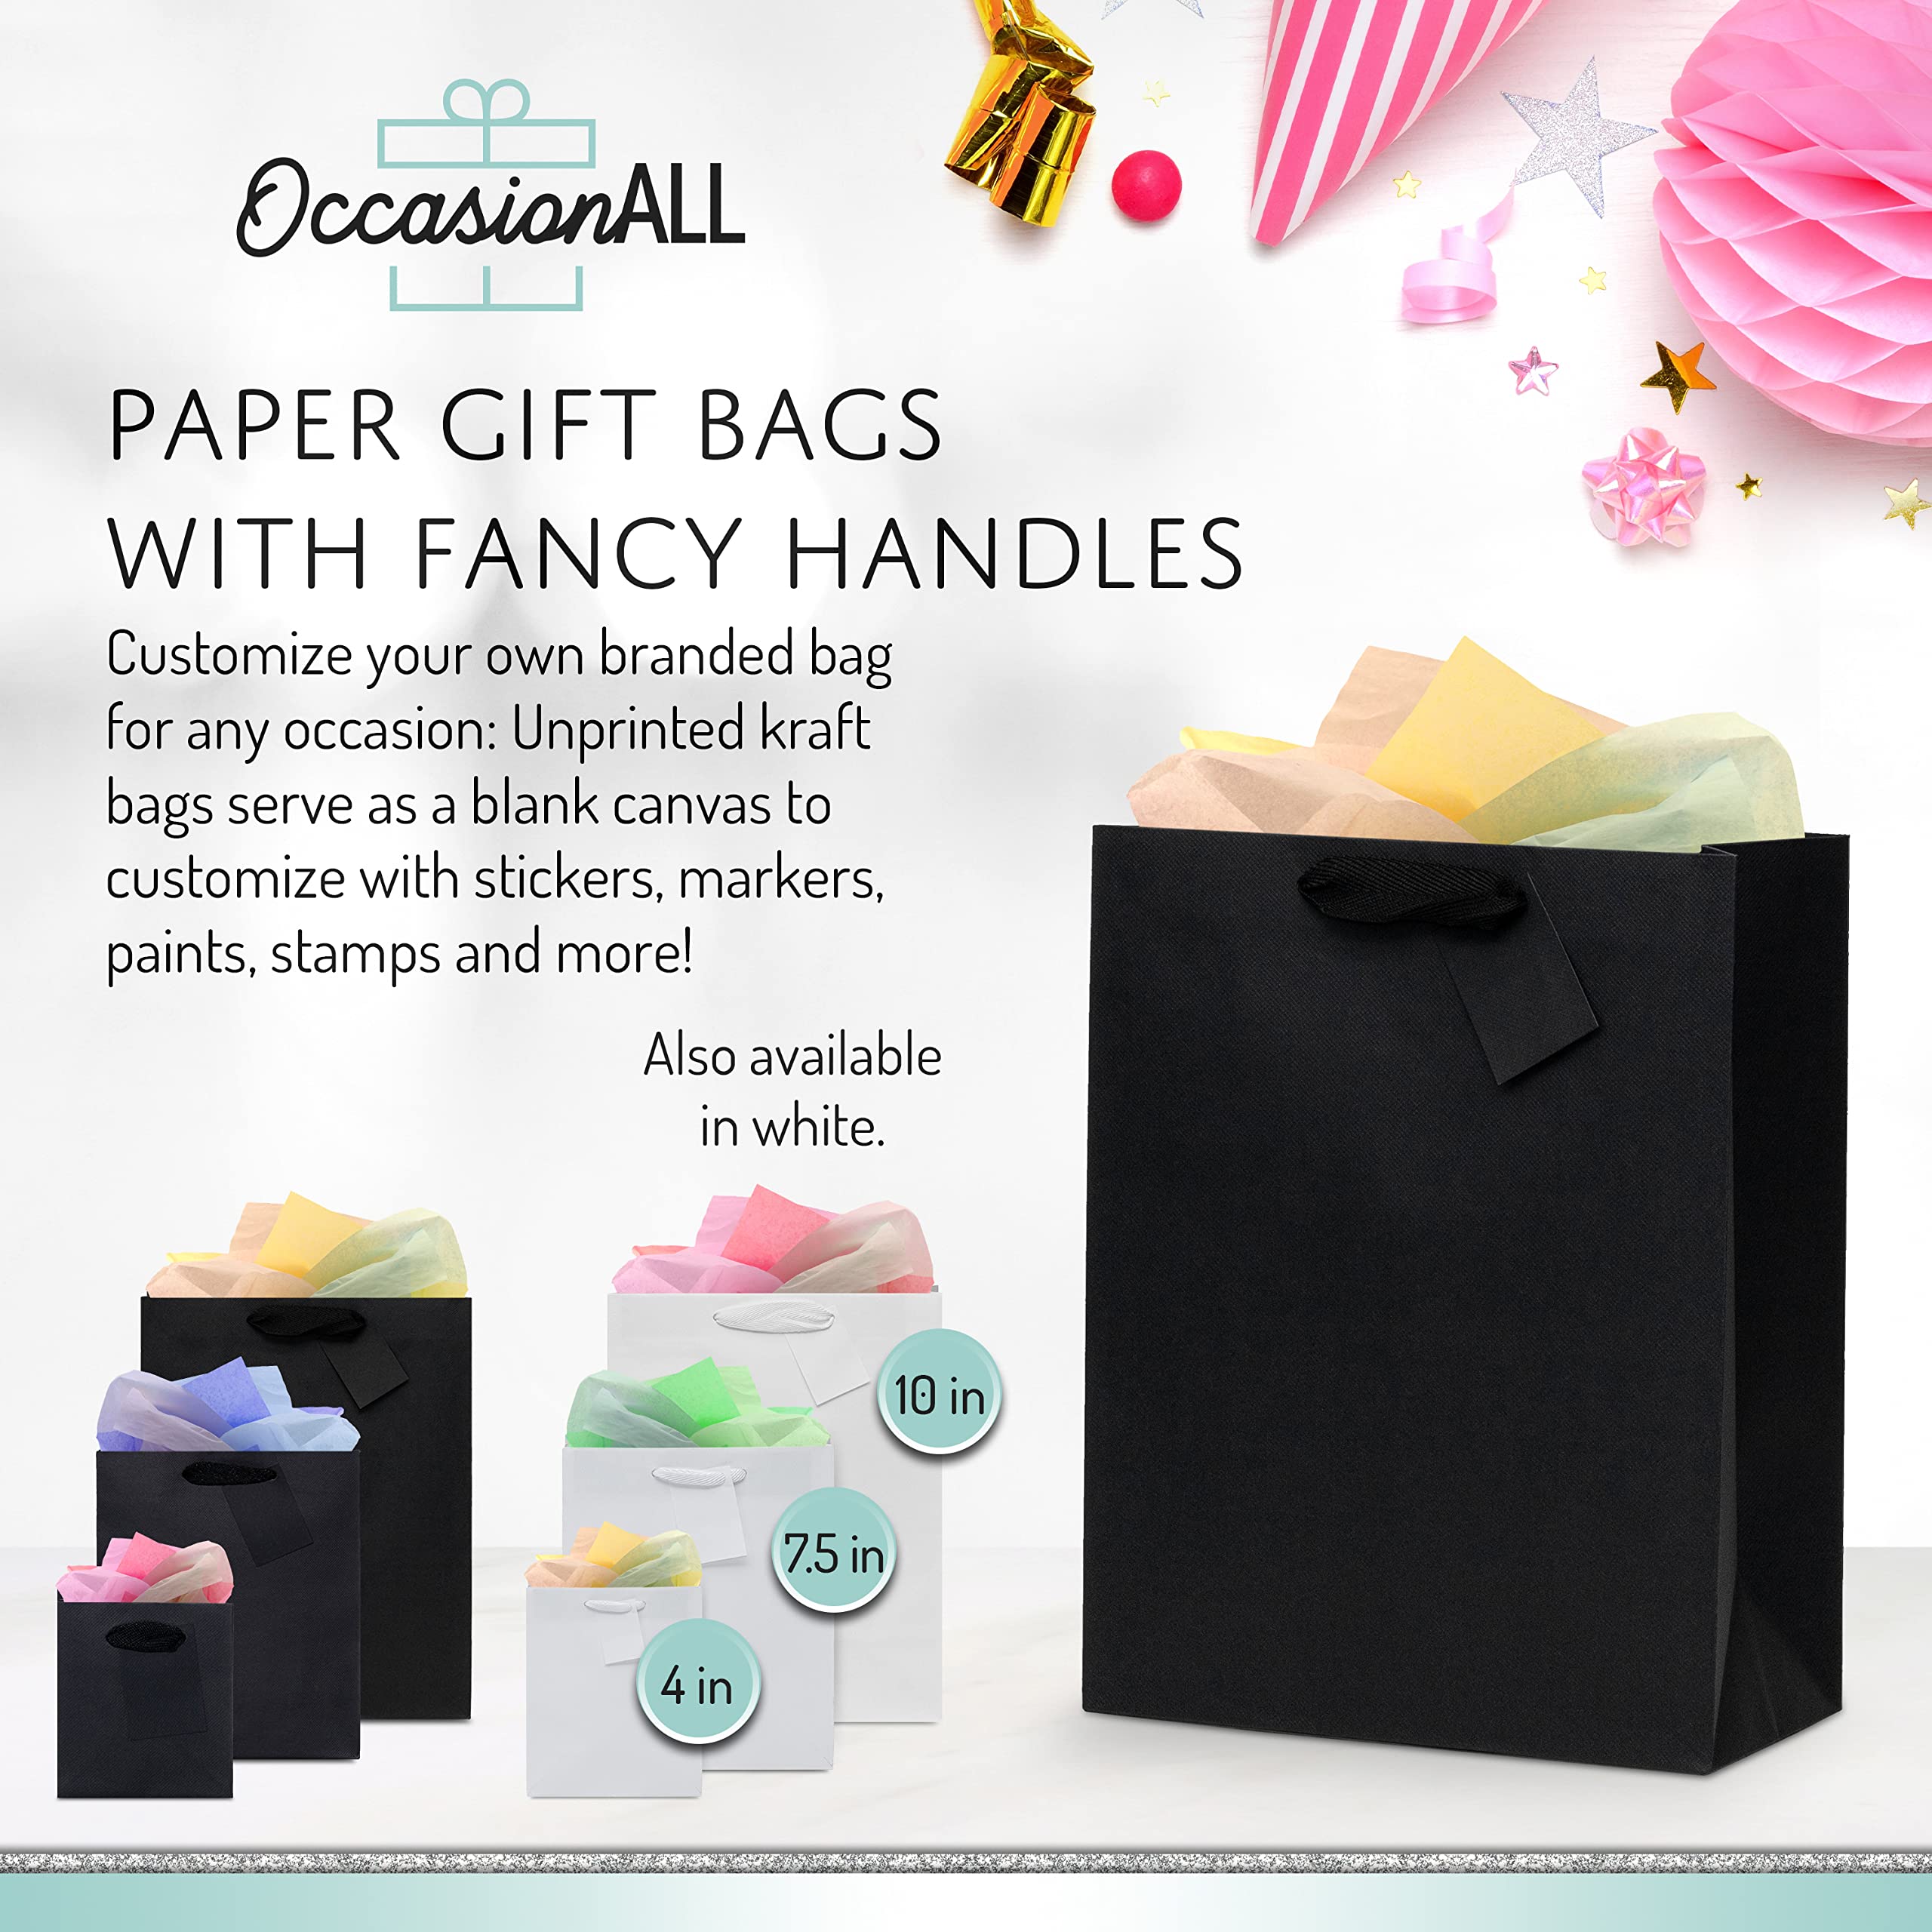 OccasionALL Gift Bags - Designer Paper Wine Bottle Bags with Handle  - Good